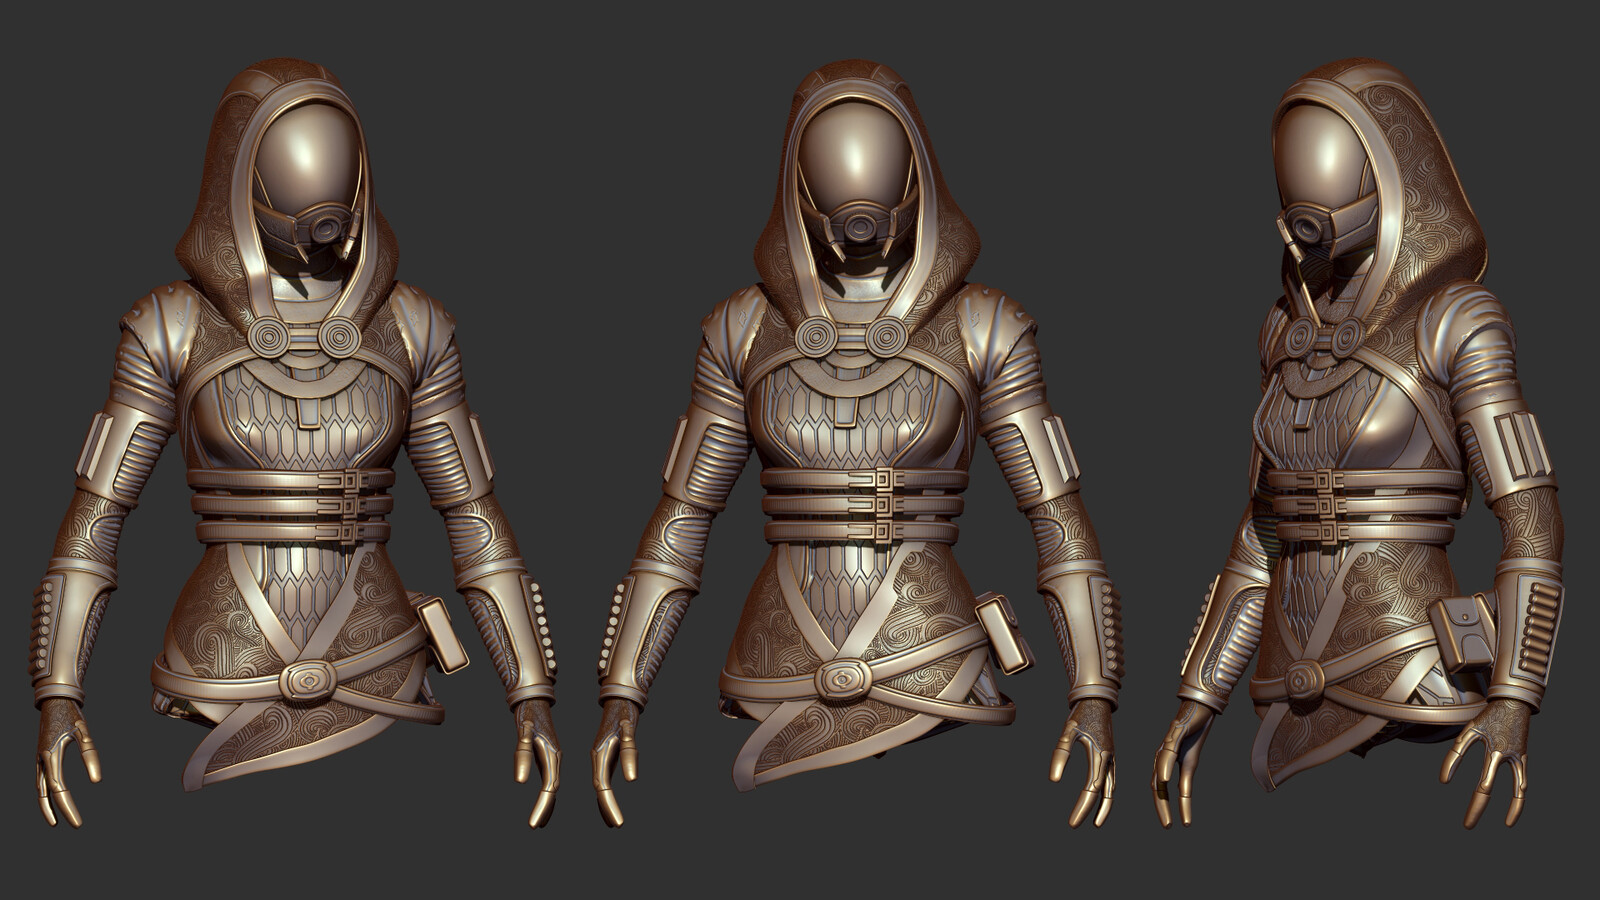 ZBrush viewport. Basic pose test. Not used for final image.